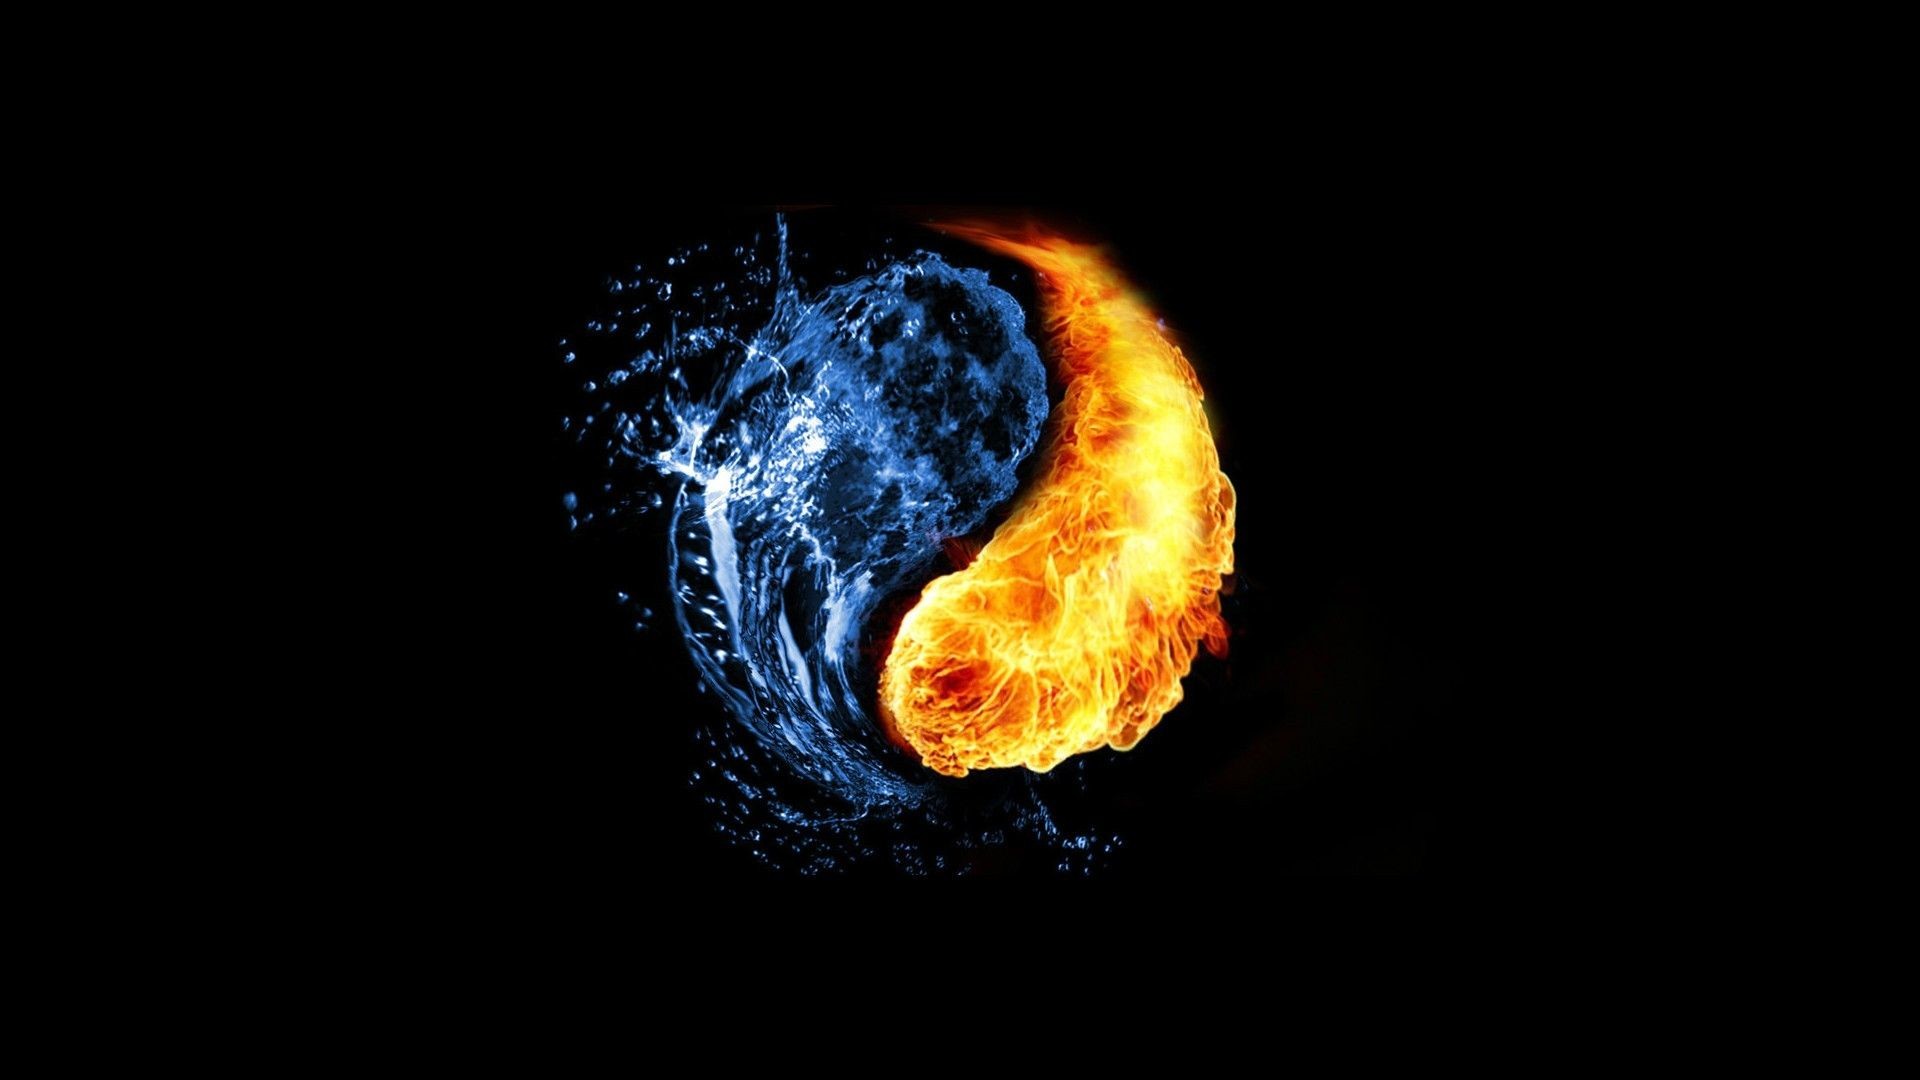 1920x1080 Water Fire Ying Yang - 3D Wallpapers | Best HD Wallpapers, Photos and Images  | WallpaperMotion.com